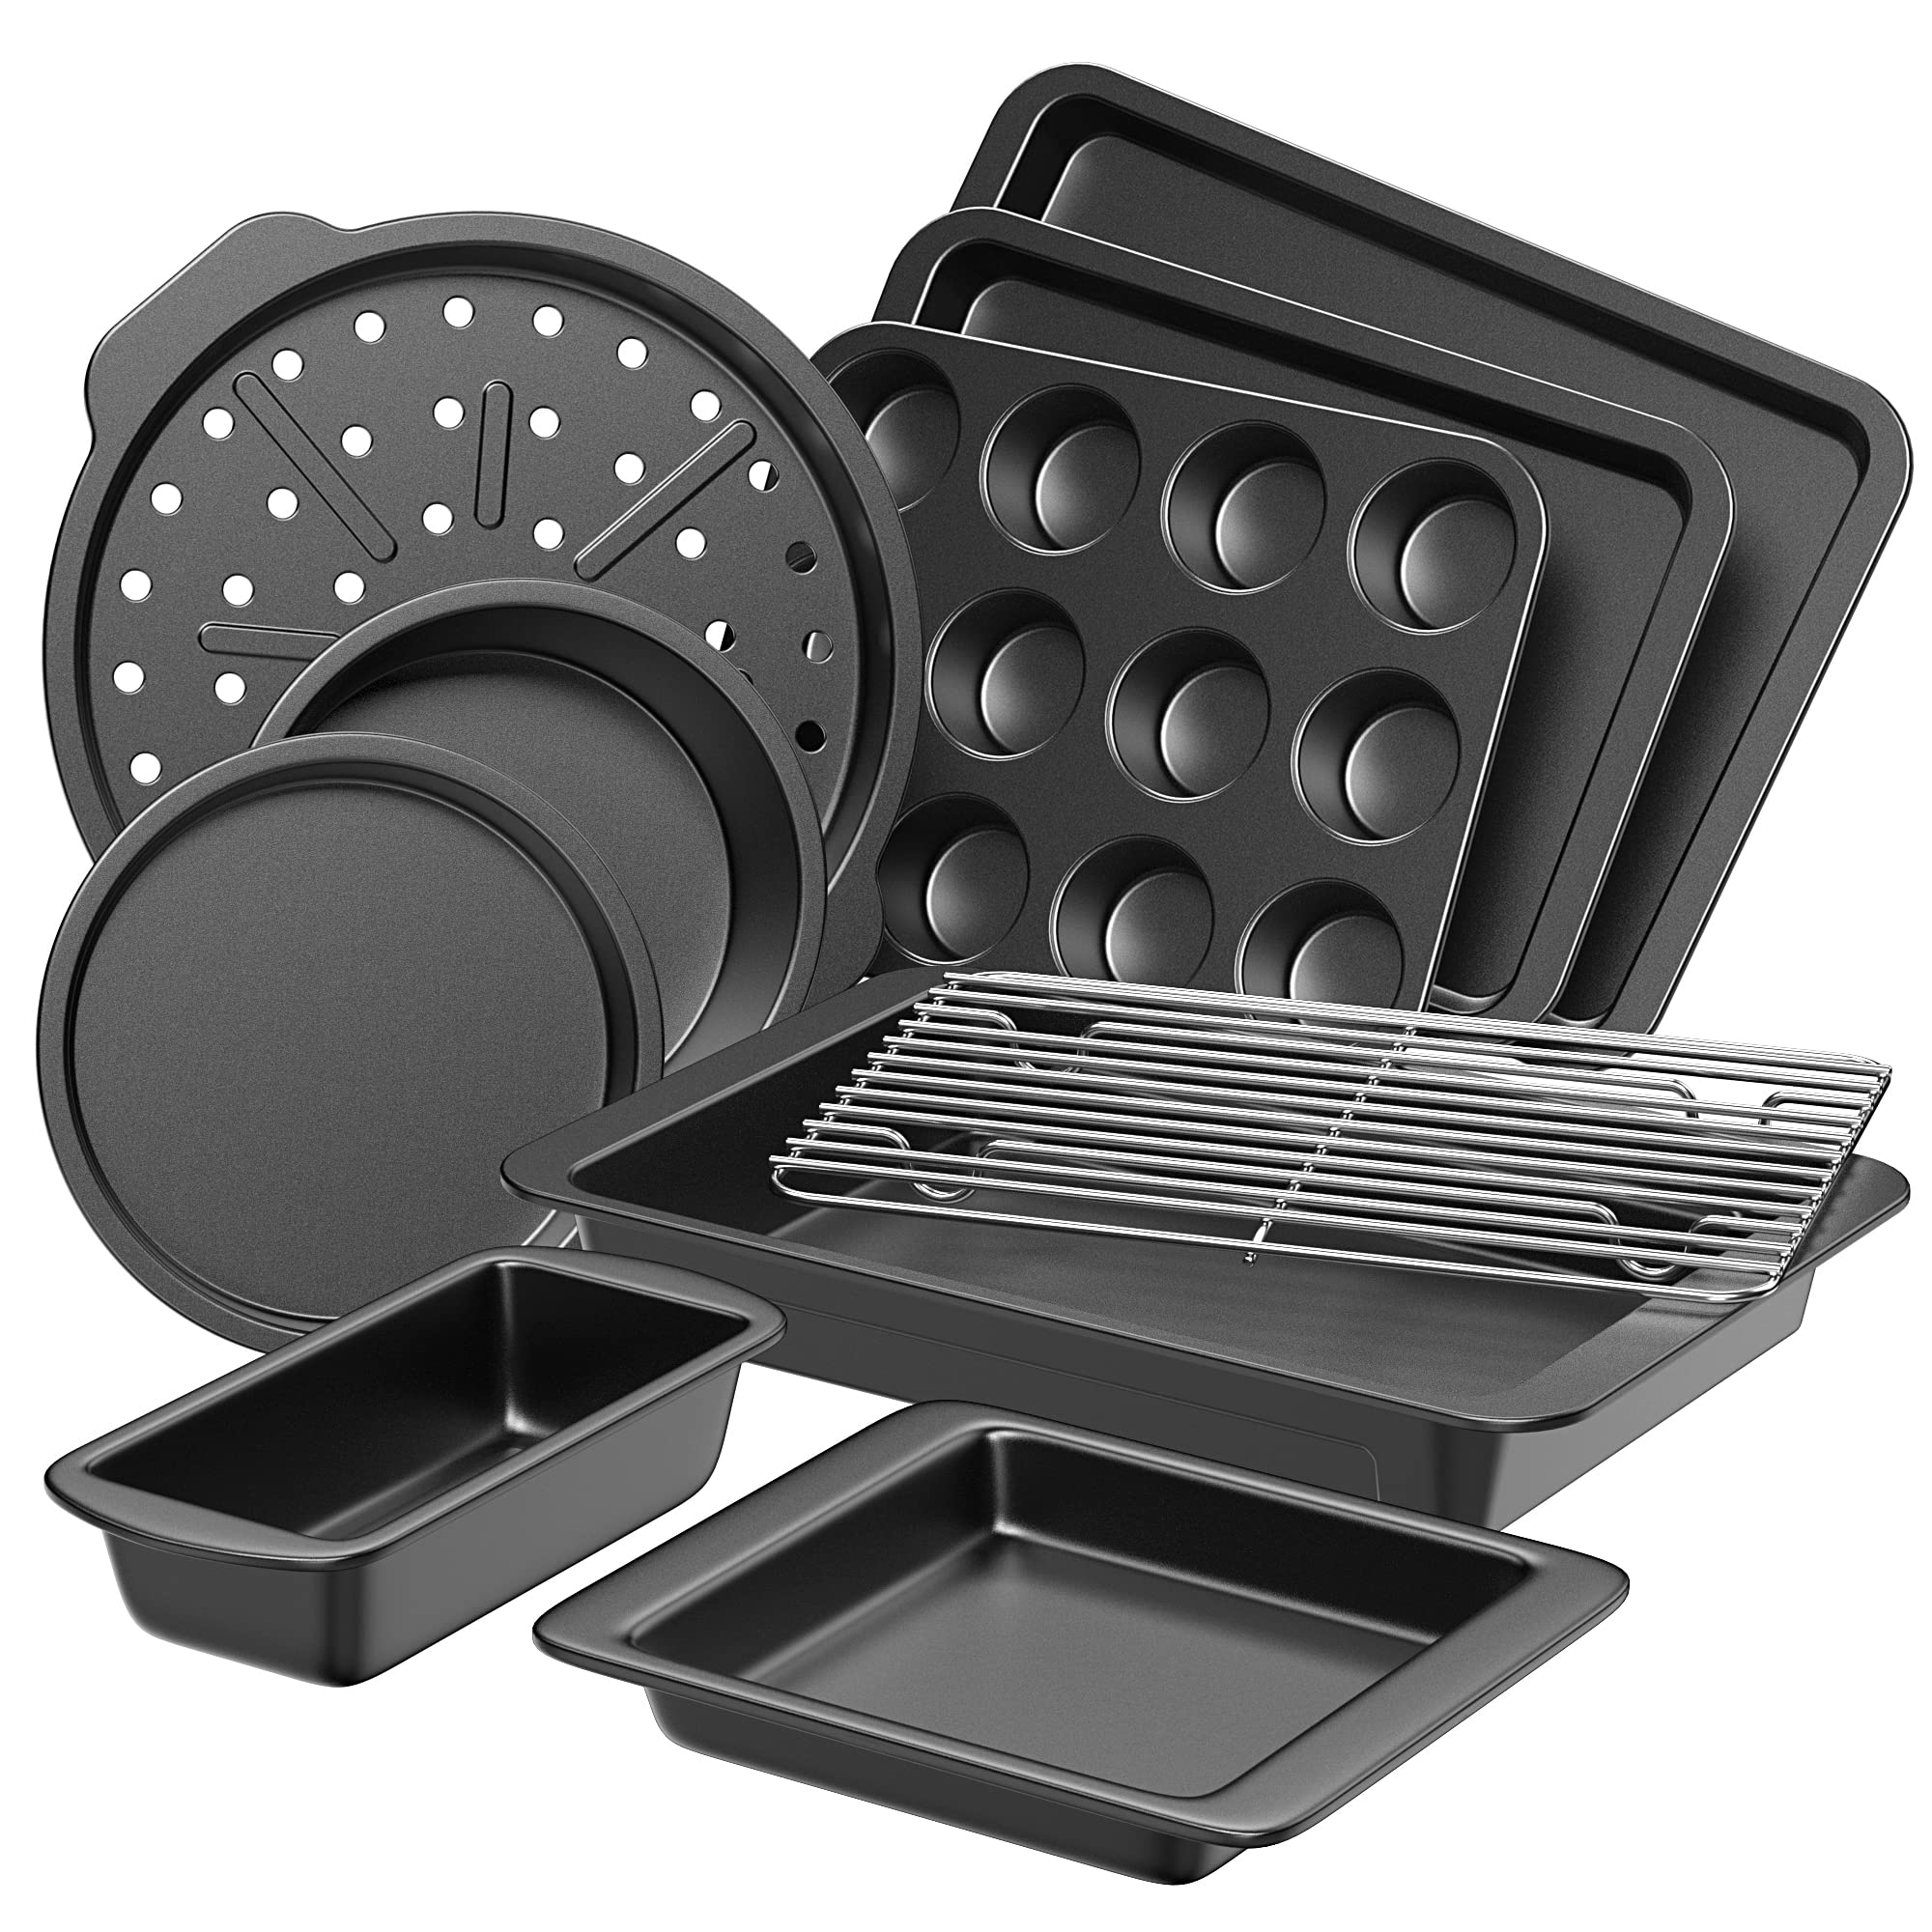 HONGBAKE Bakeware Sets, Baking Pans Set, Nonstick Oven Pan for Kitchen with Wider Grips, 10-Pieces Including Rack, Cookie Sheet, Cake Pans, Loaf Pan, Muffin Pan, Pizza Pan - Grey